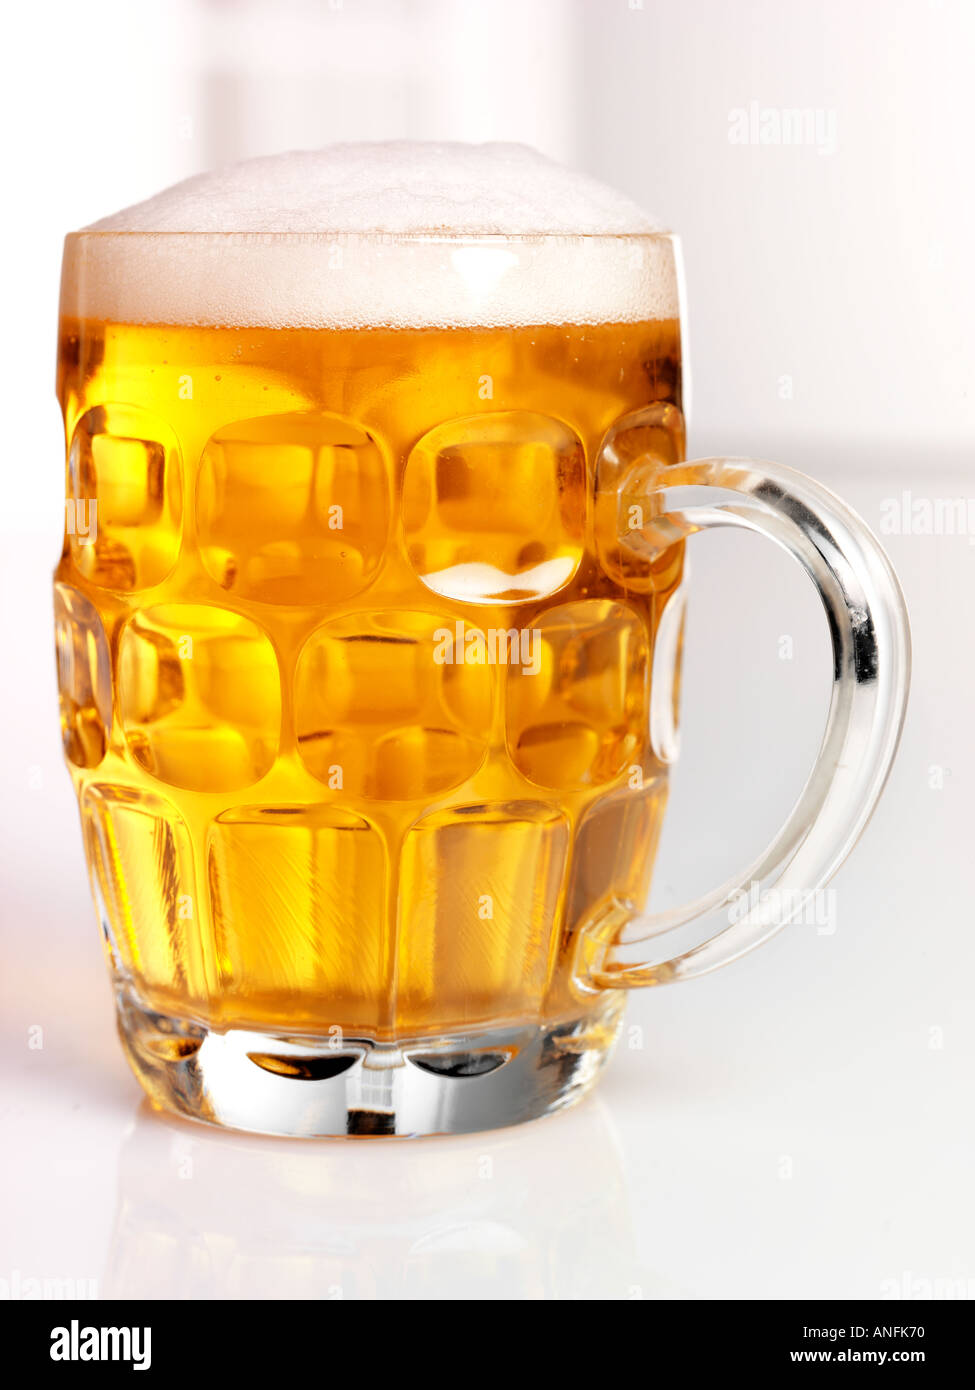 PINT OF LAGER BEER Stock Photo